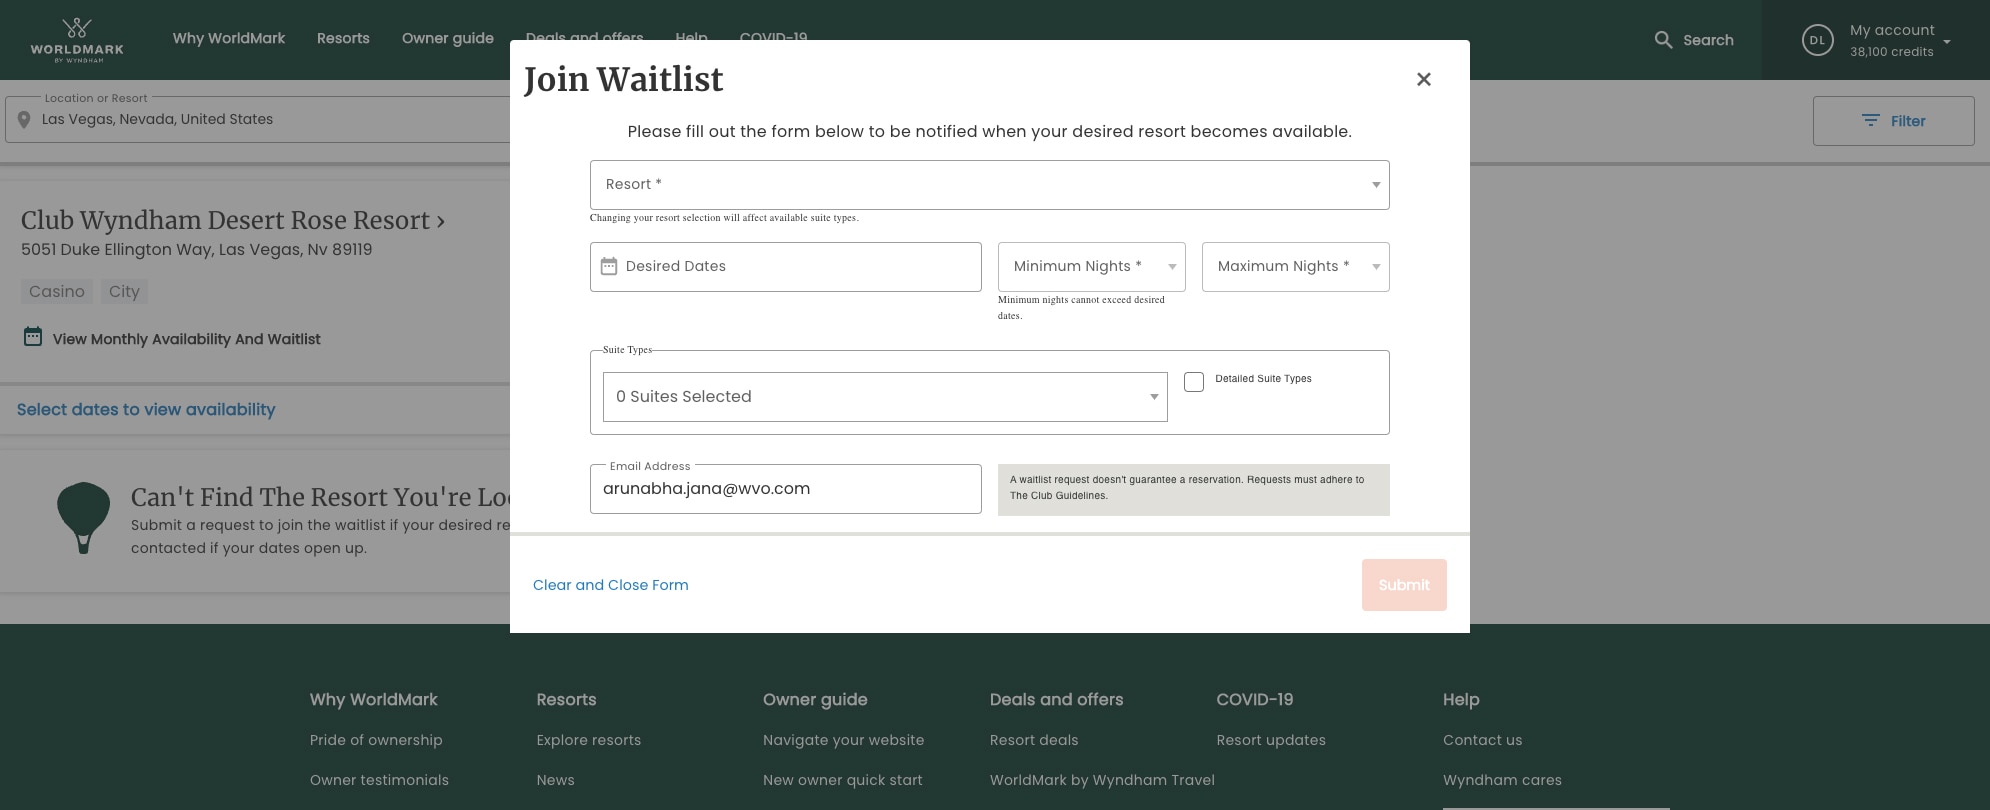 View of the Waitlist request form on the WorldMark owner website